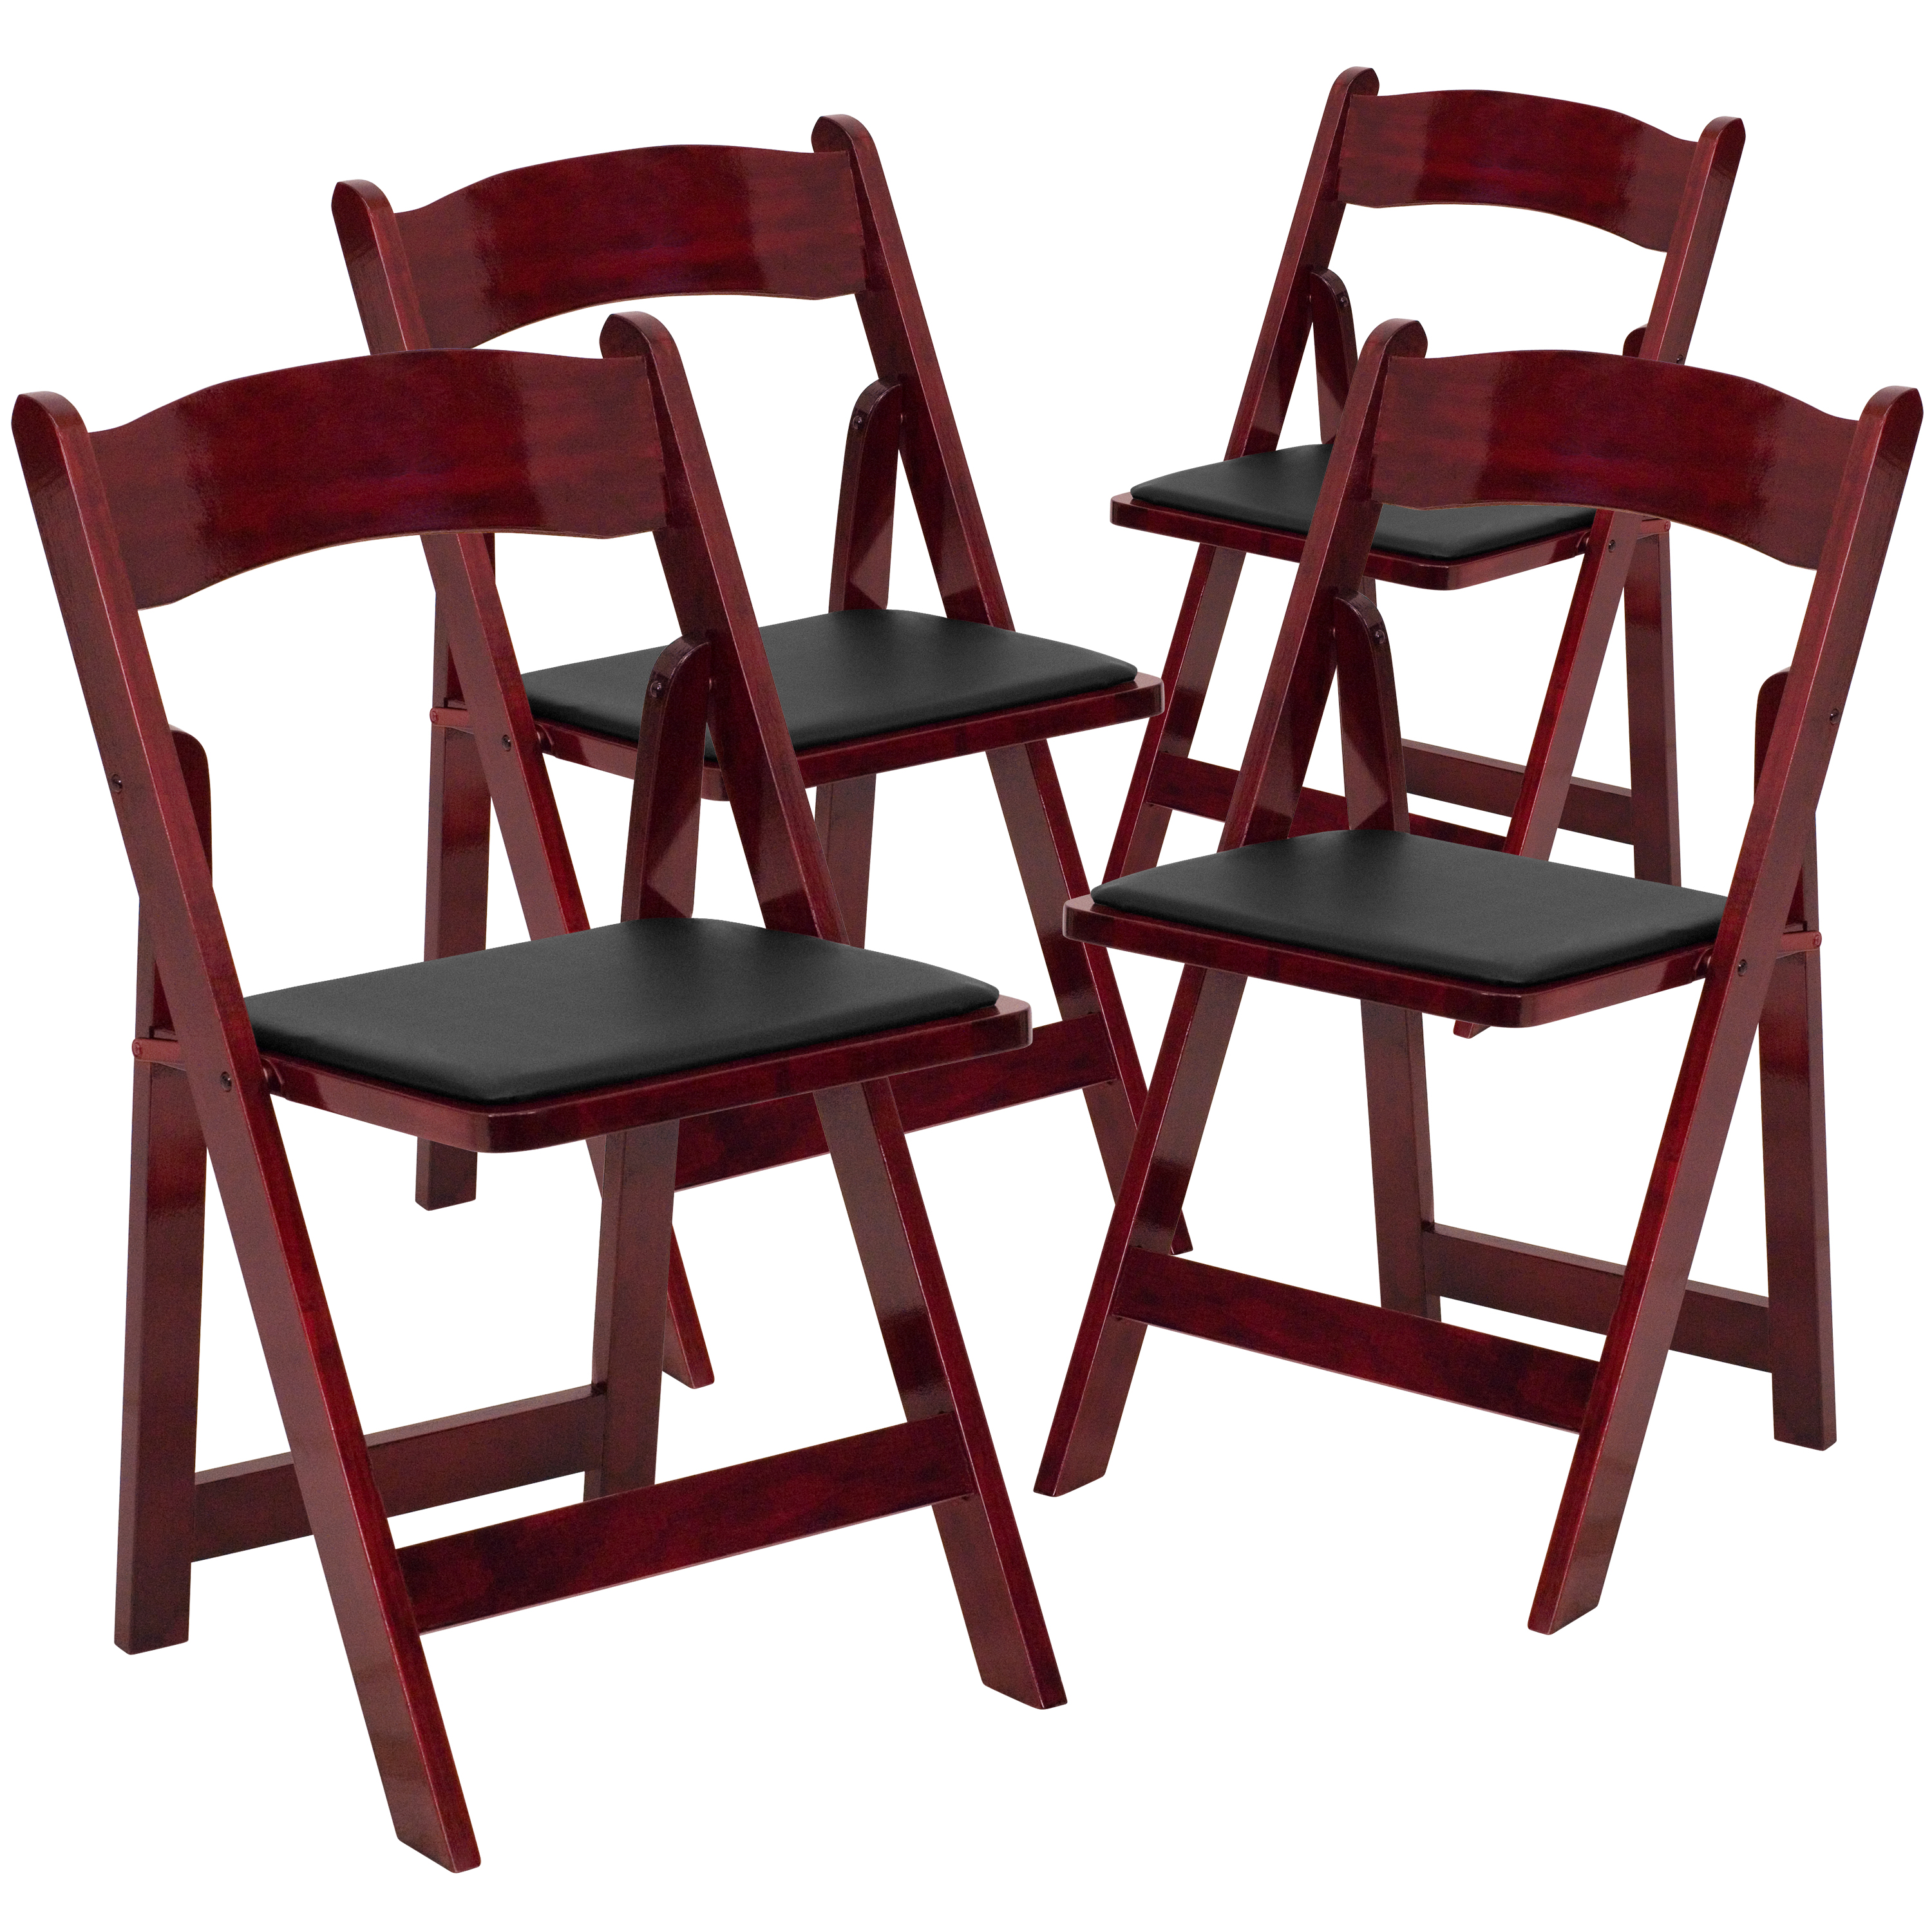 Flash Furniture 4 Pack HERCULES Series Mahogany Wood Folding Chair with Vinyl Padded Seat - image 1 of 9